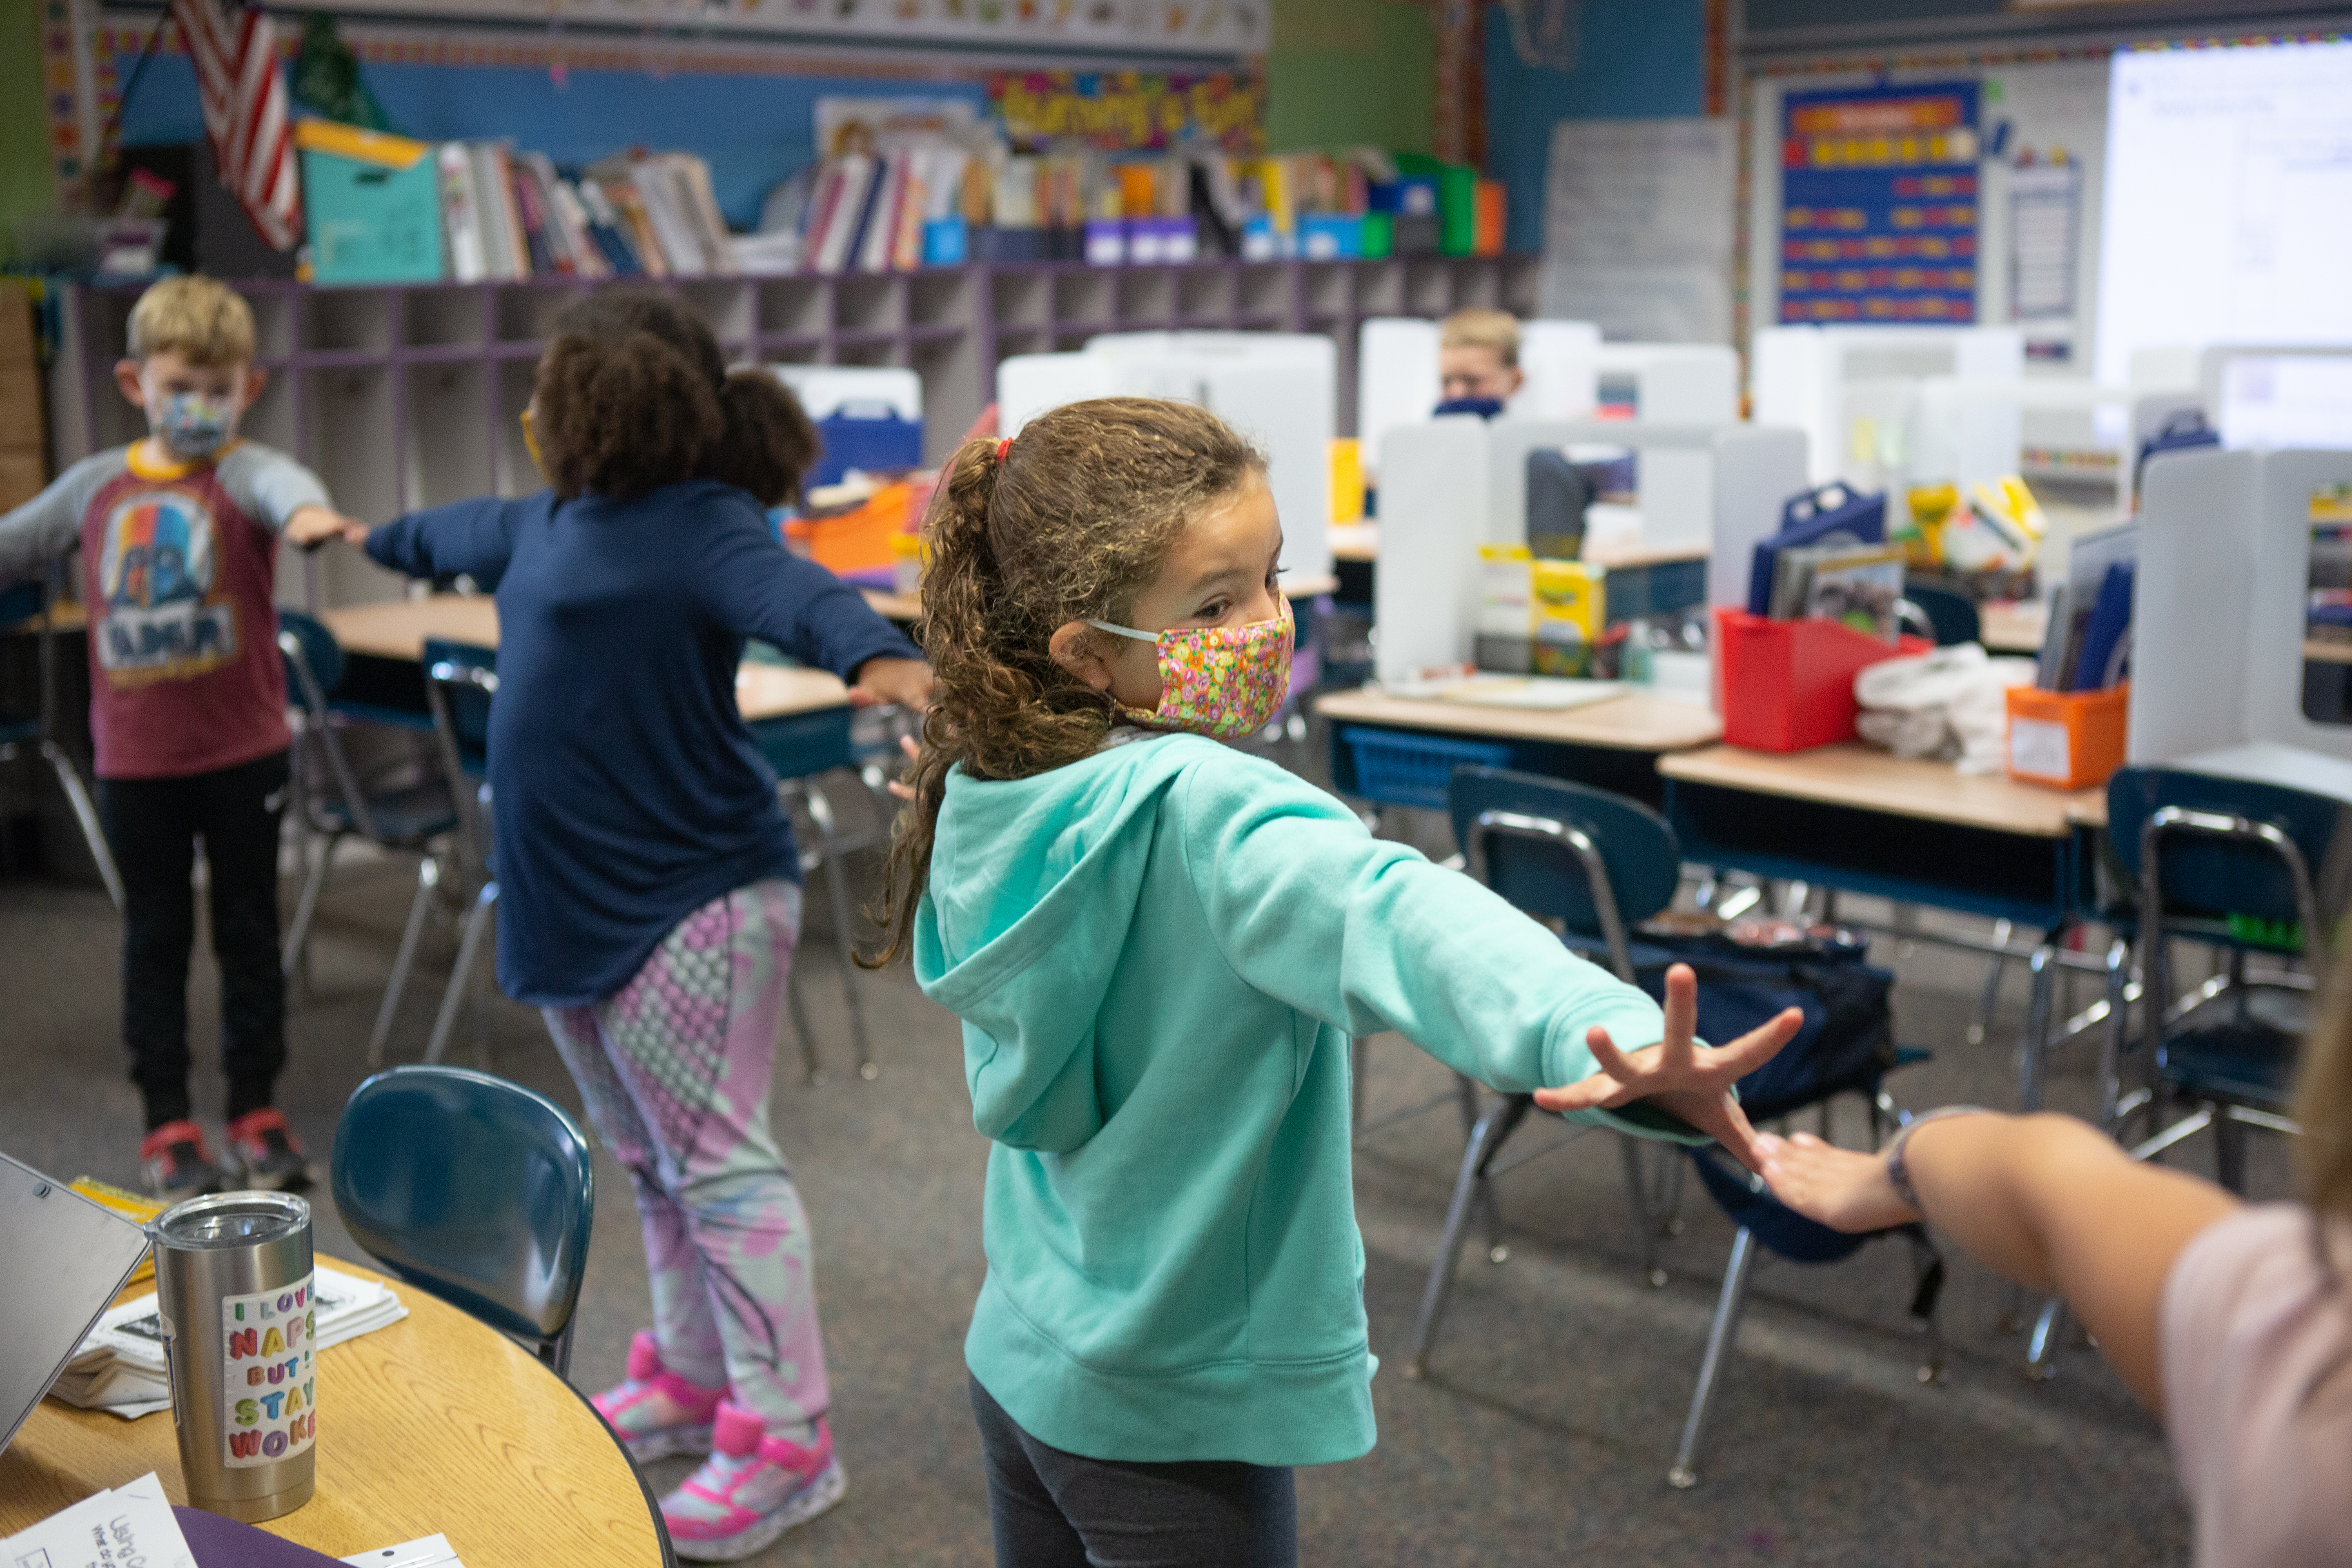 Students create distance between each other using their arms as they line up to go outside in Mrs. Cecarelliís second grade class at Wesley Elementary School in Middletown, CT, October 5, 2020.